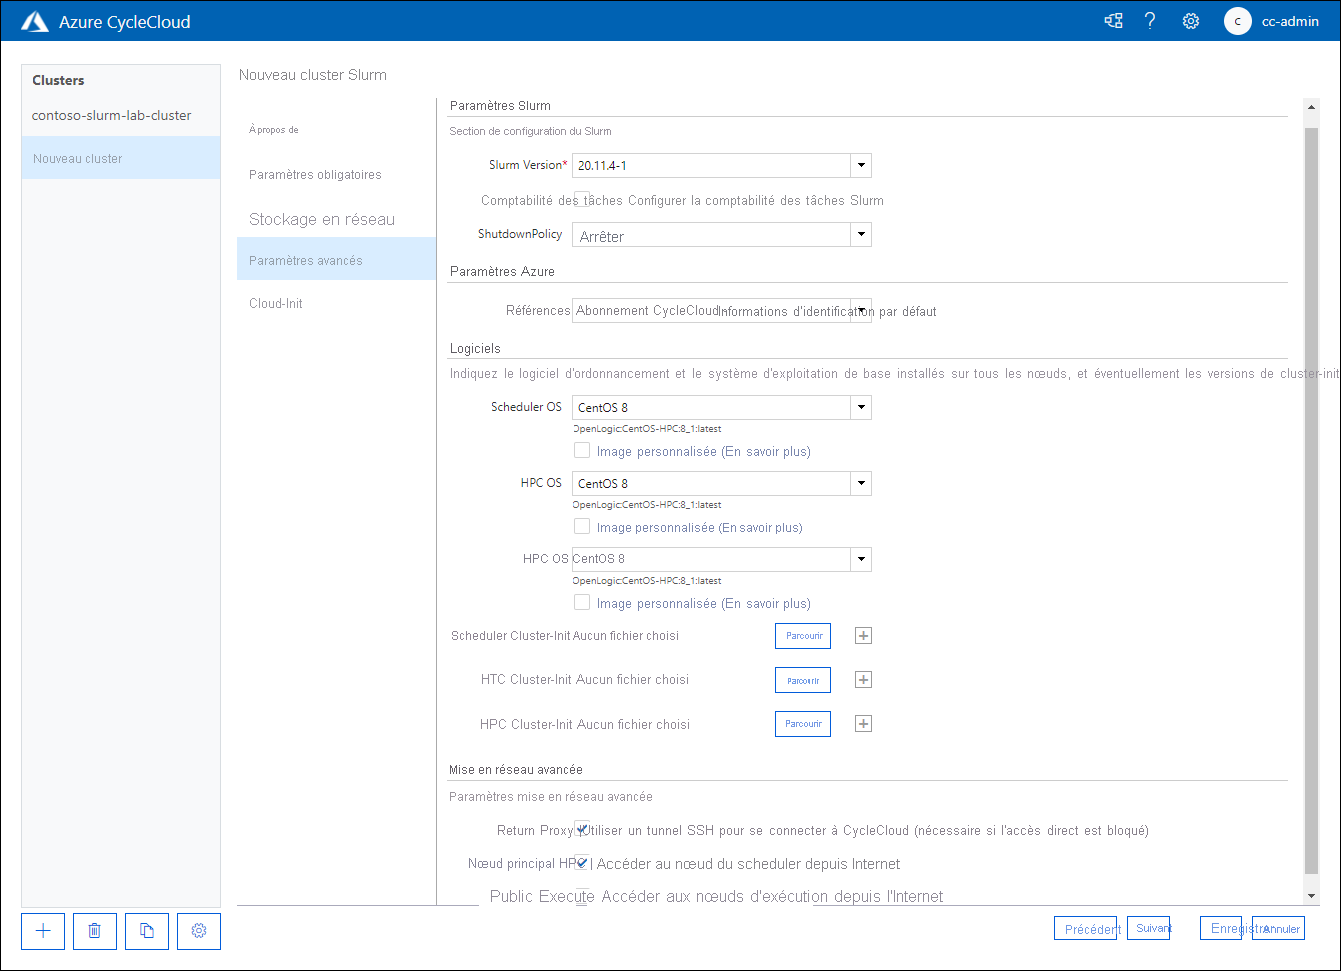 Screenshot of the Advanced Settings tab of the New Slurm Cluster page of the Azure CycleCloud web application.